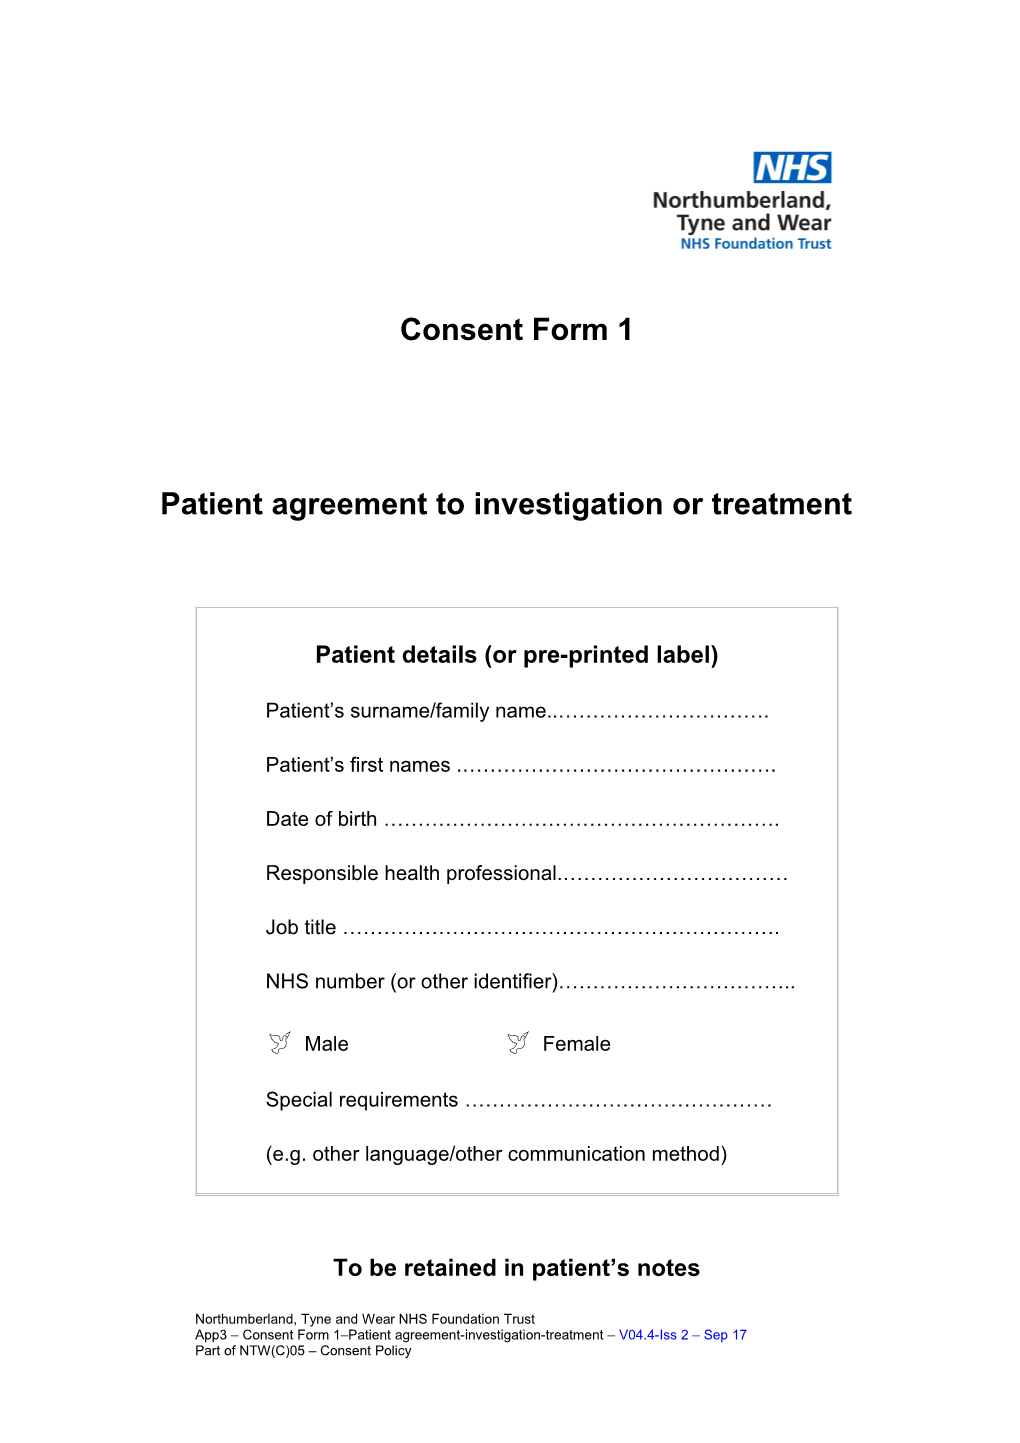 Patient Agreement to Investigationor Treatment